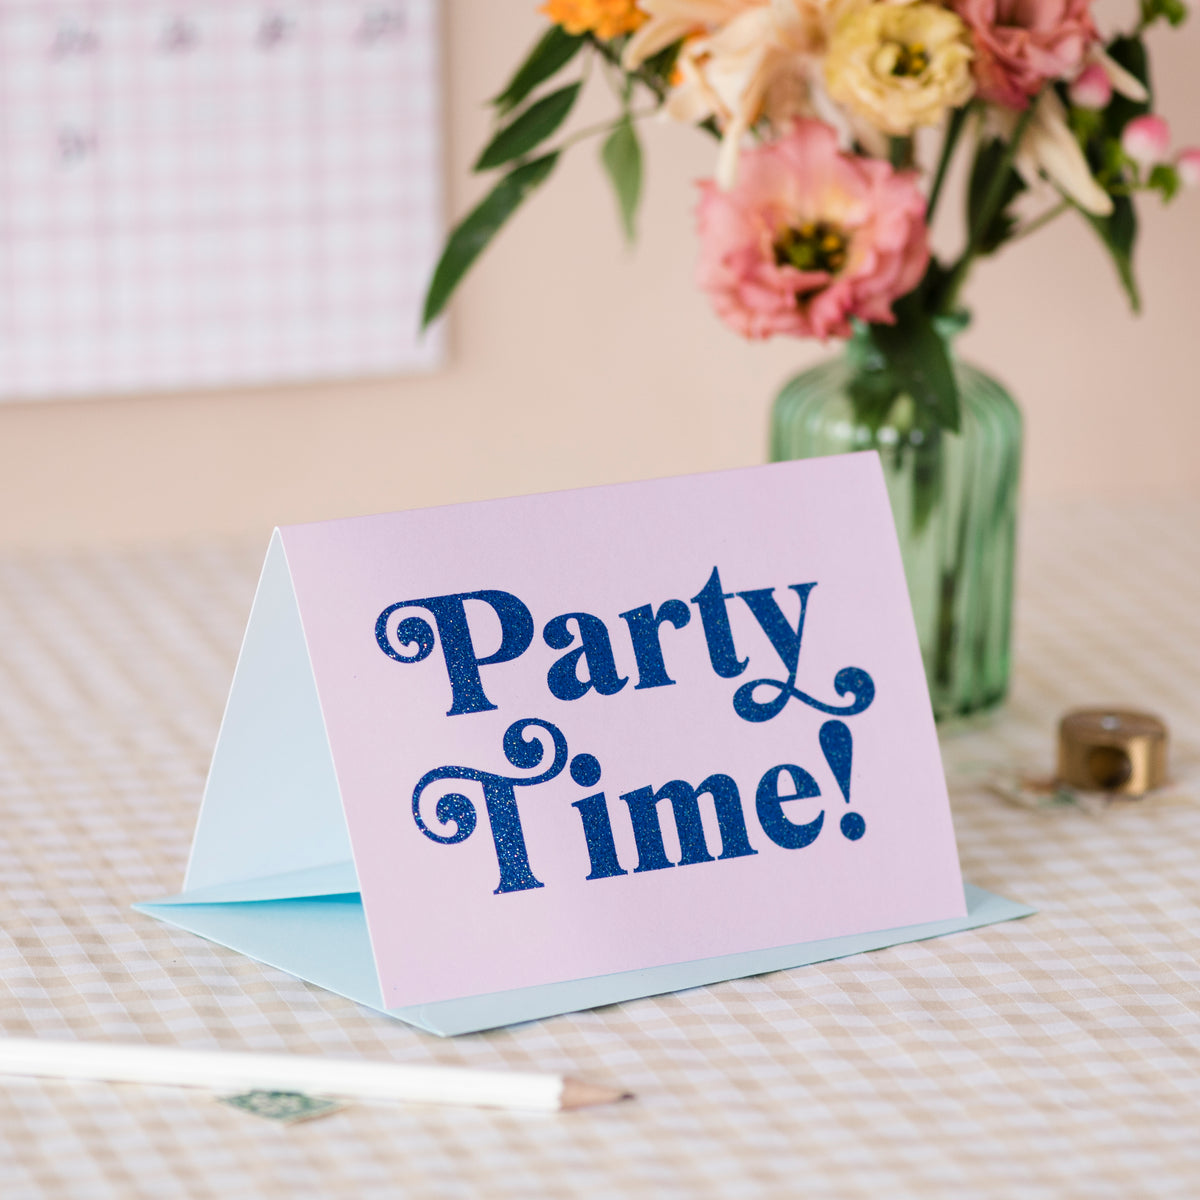 'Party Time!' Greetings Card - Biodegradable Glitter